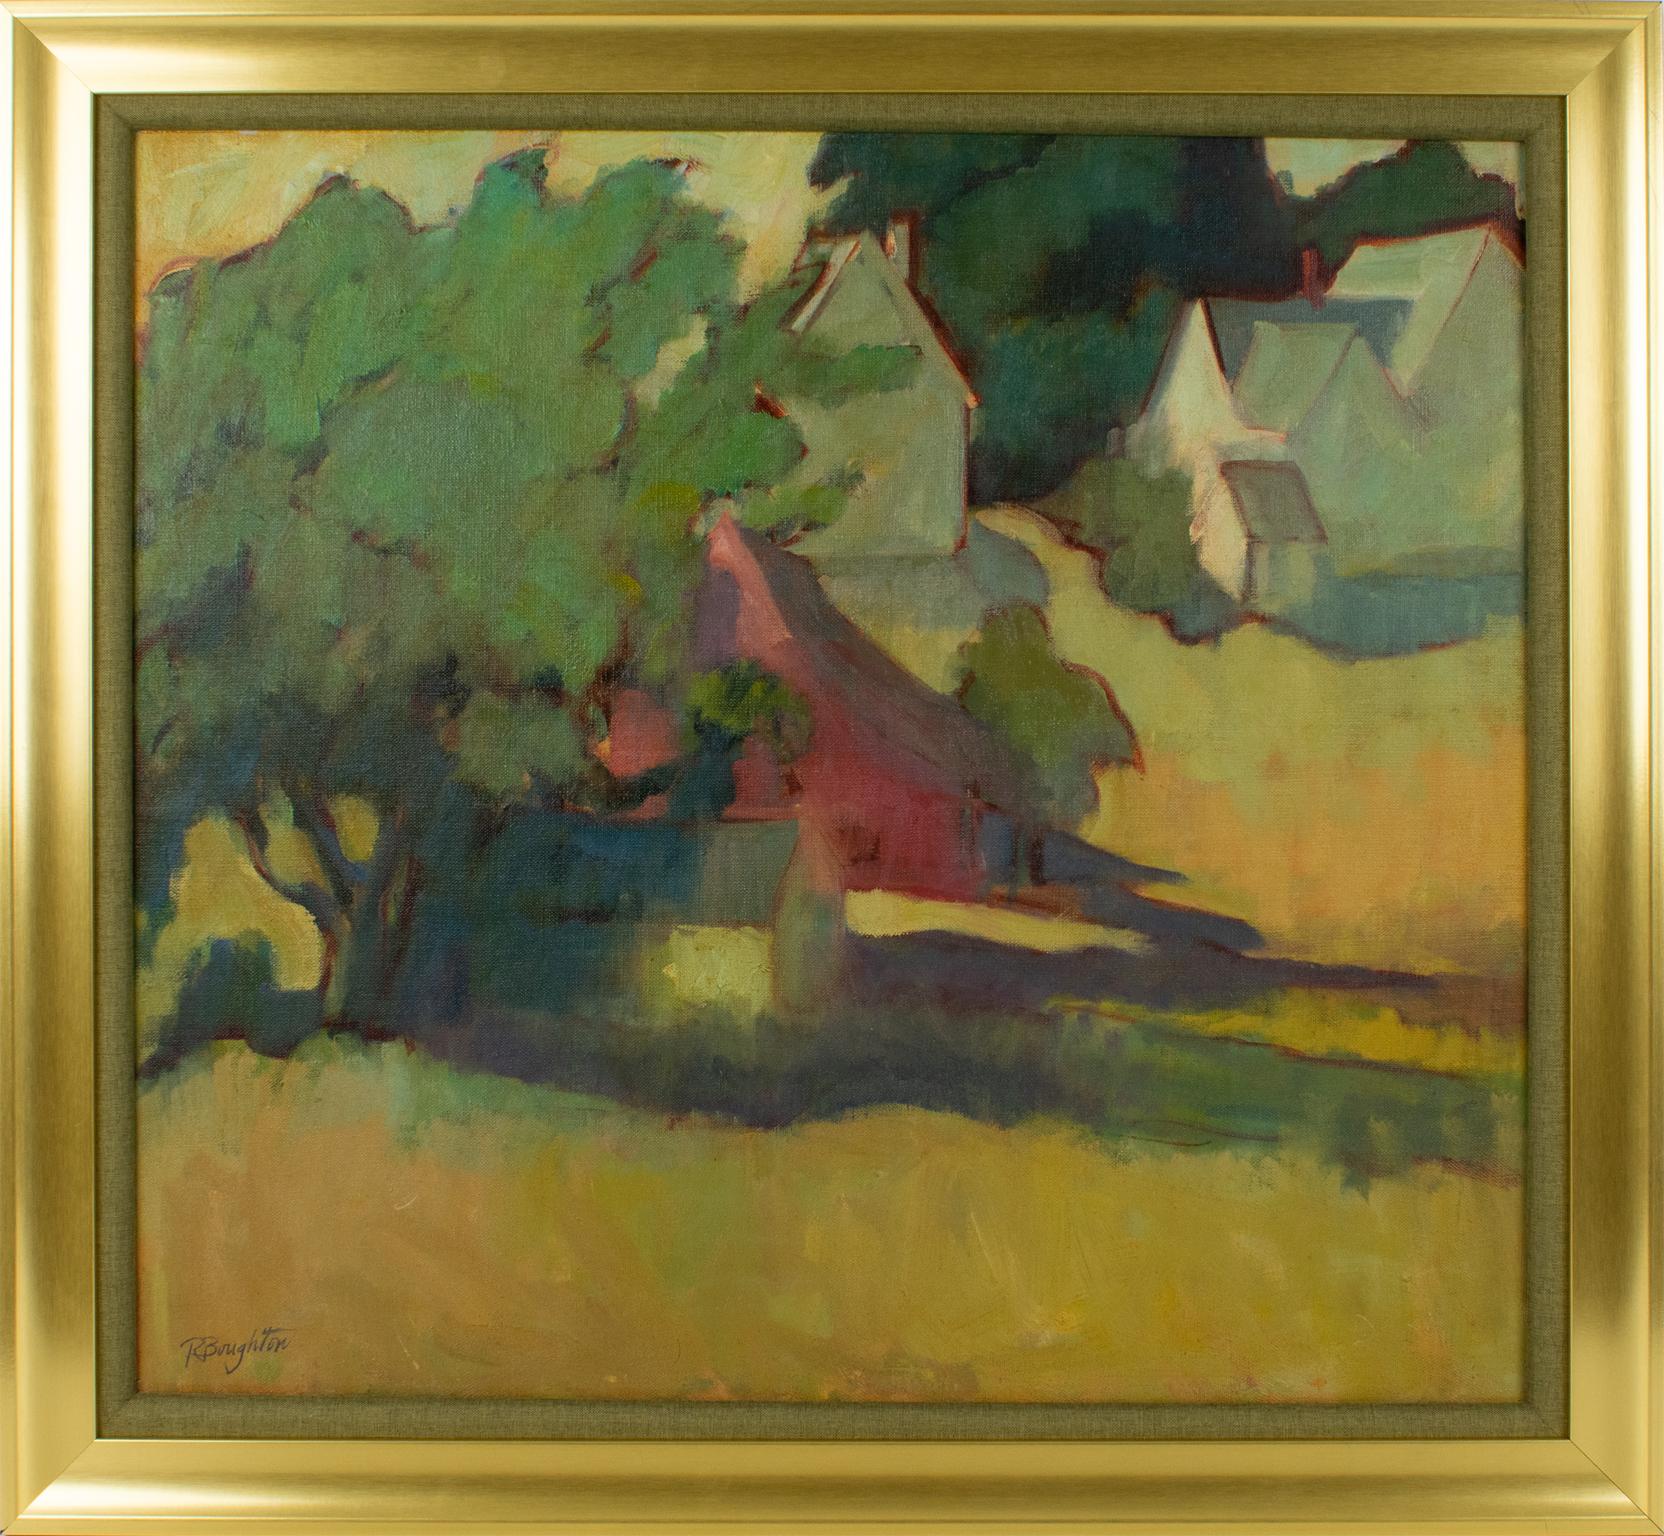 This elegant oil on mounted canvas by R. Boughton (England, 20th Century) features an English landscape composition. The artwork is signed in the bottom left corner. The impressionistic style of this piece has blurry colors to define a lovely view